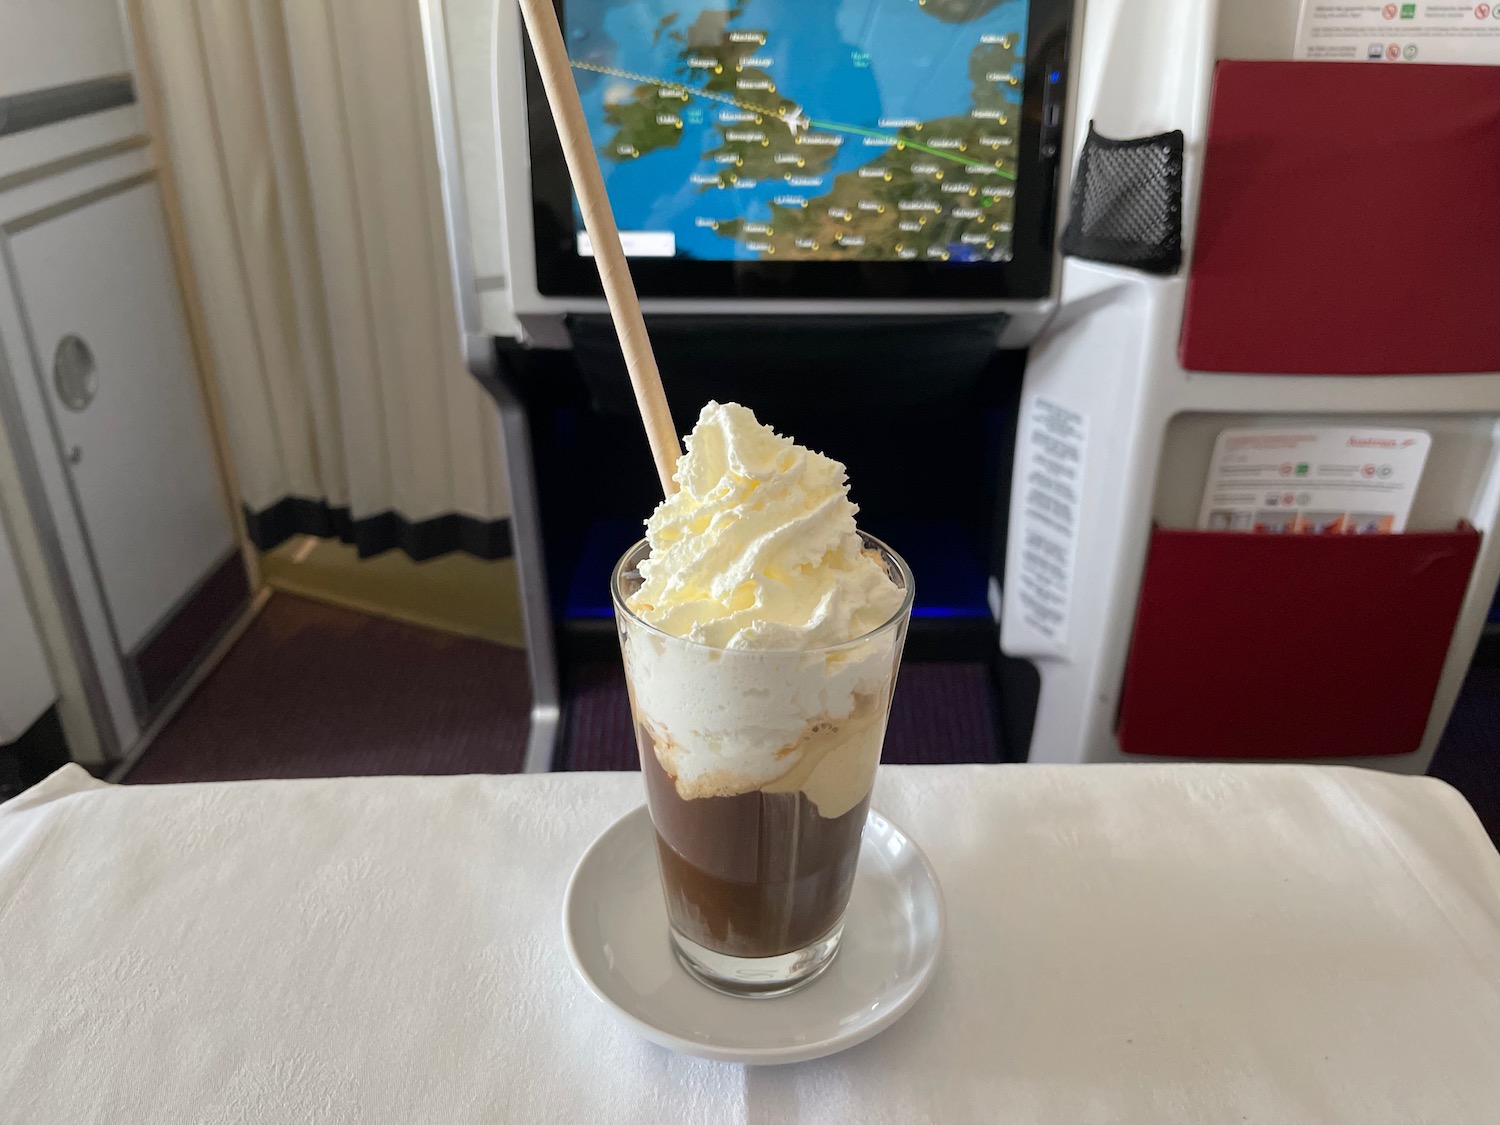 a glass of chocolate milkshake with whipped cream and a wooden stick